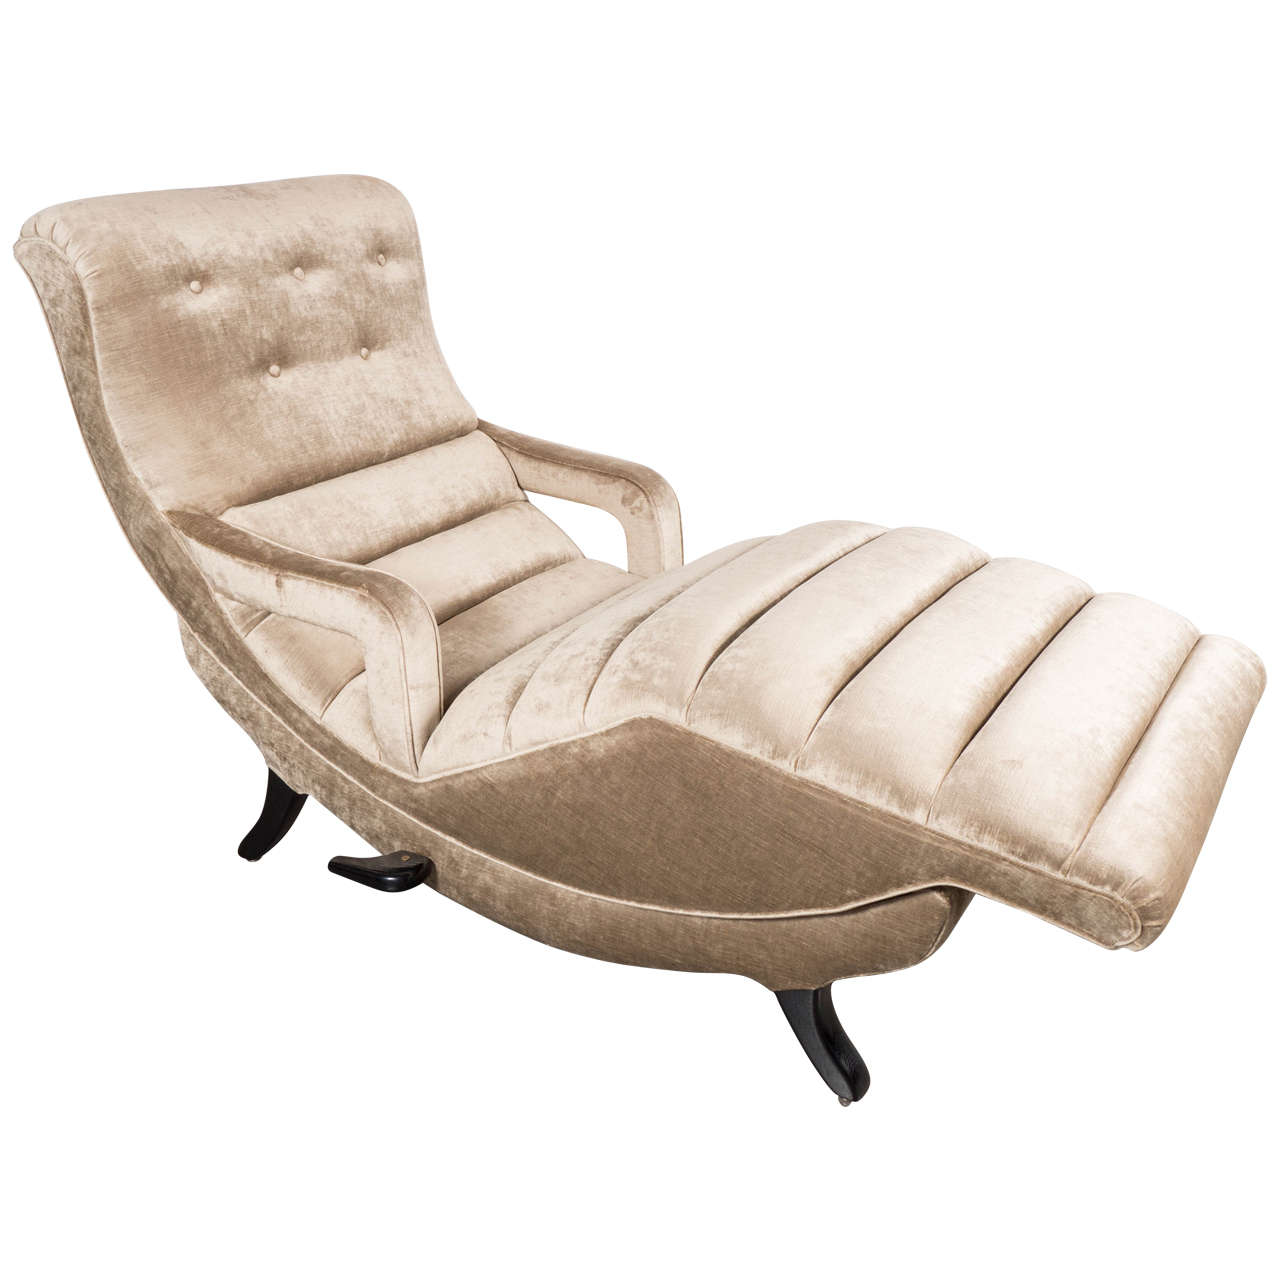 Sophisticated  Mid-Century Modernist Adjustable Chaise